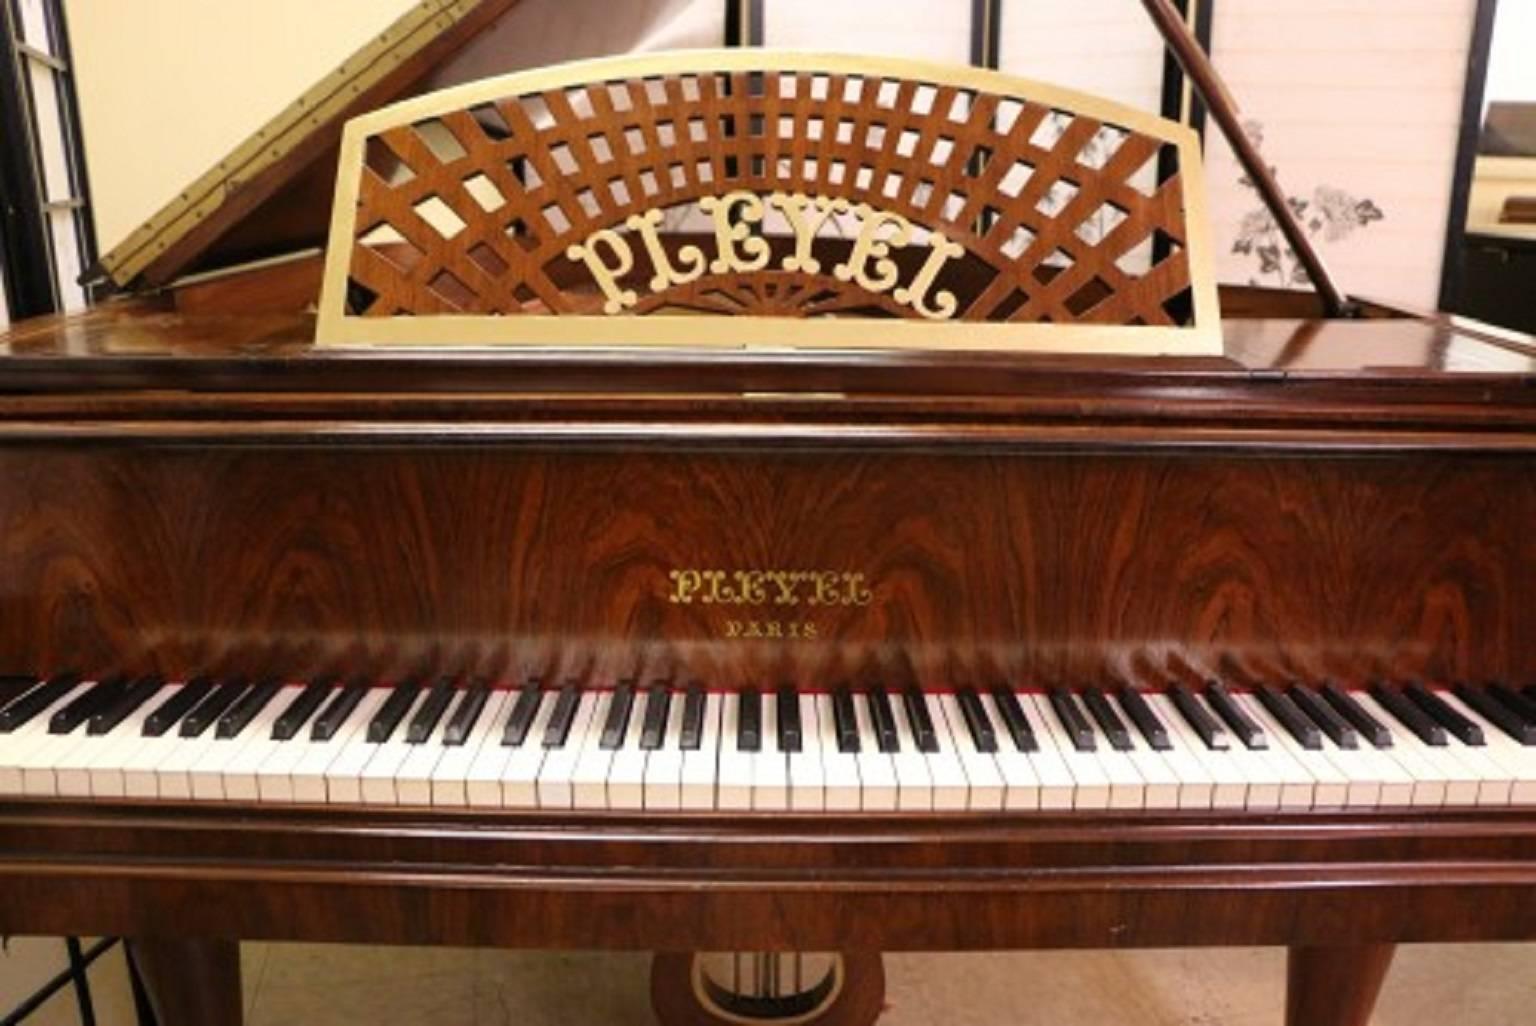 See and hear more about this magnificent piano on the VIDEO at the bottom of Sonny's Luxury Art Case Piano storefront homepage. 

Beautiful rosewood, art case hand-painted "World Renowned Historic" Pleyel Piano. 5'3" made in 1921